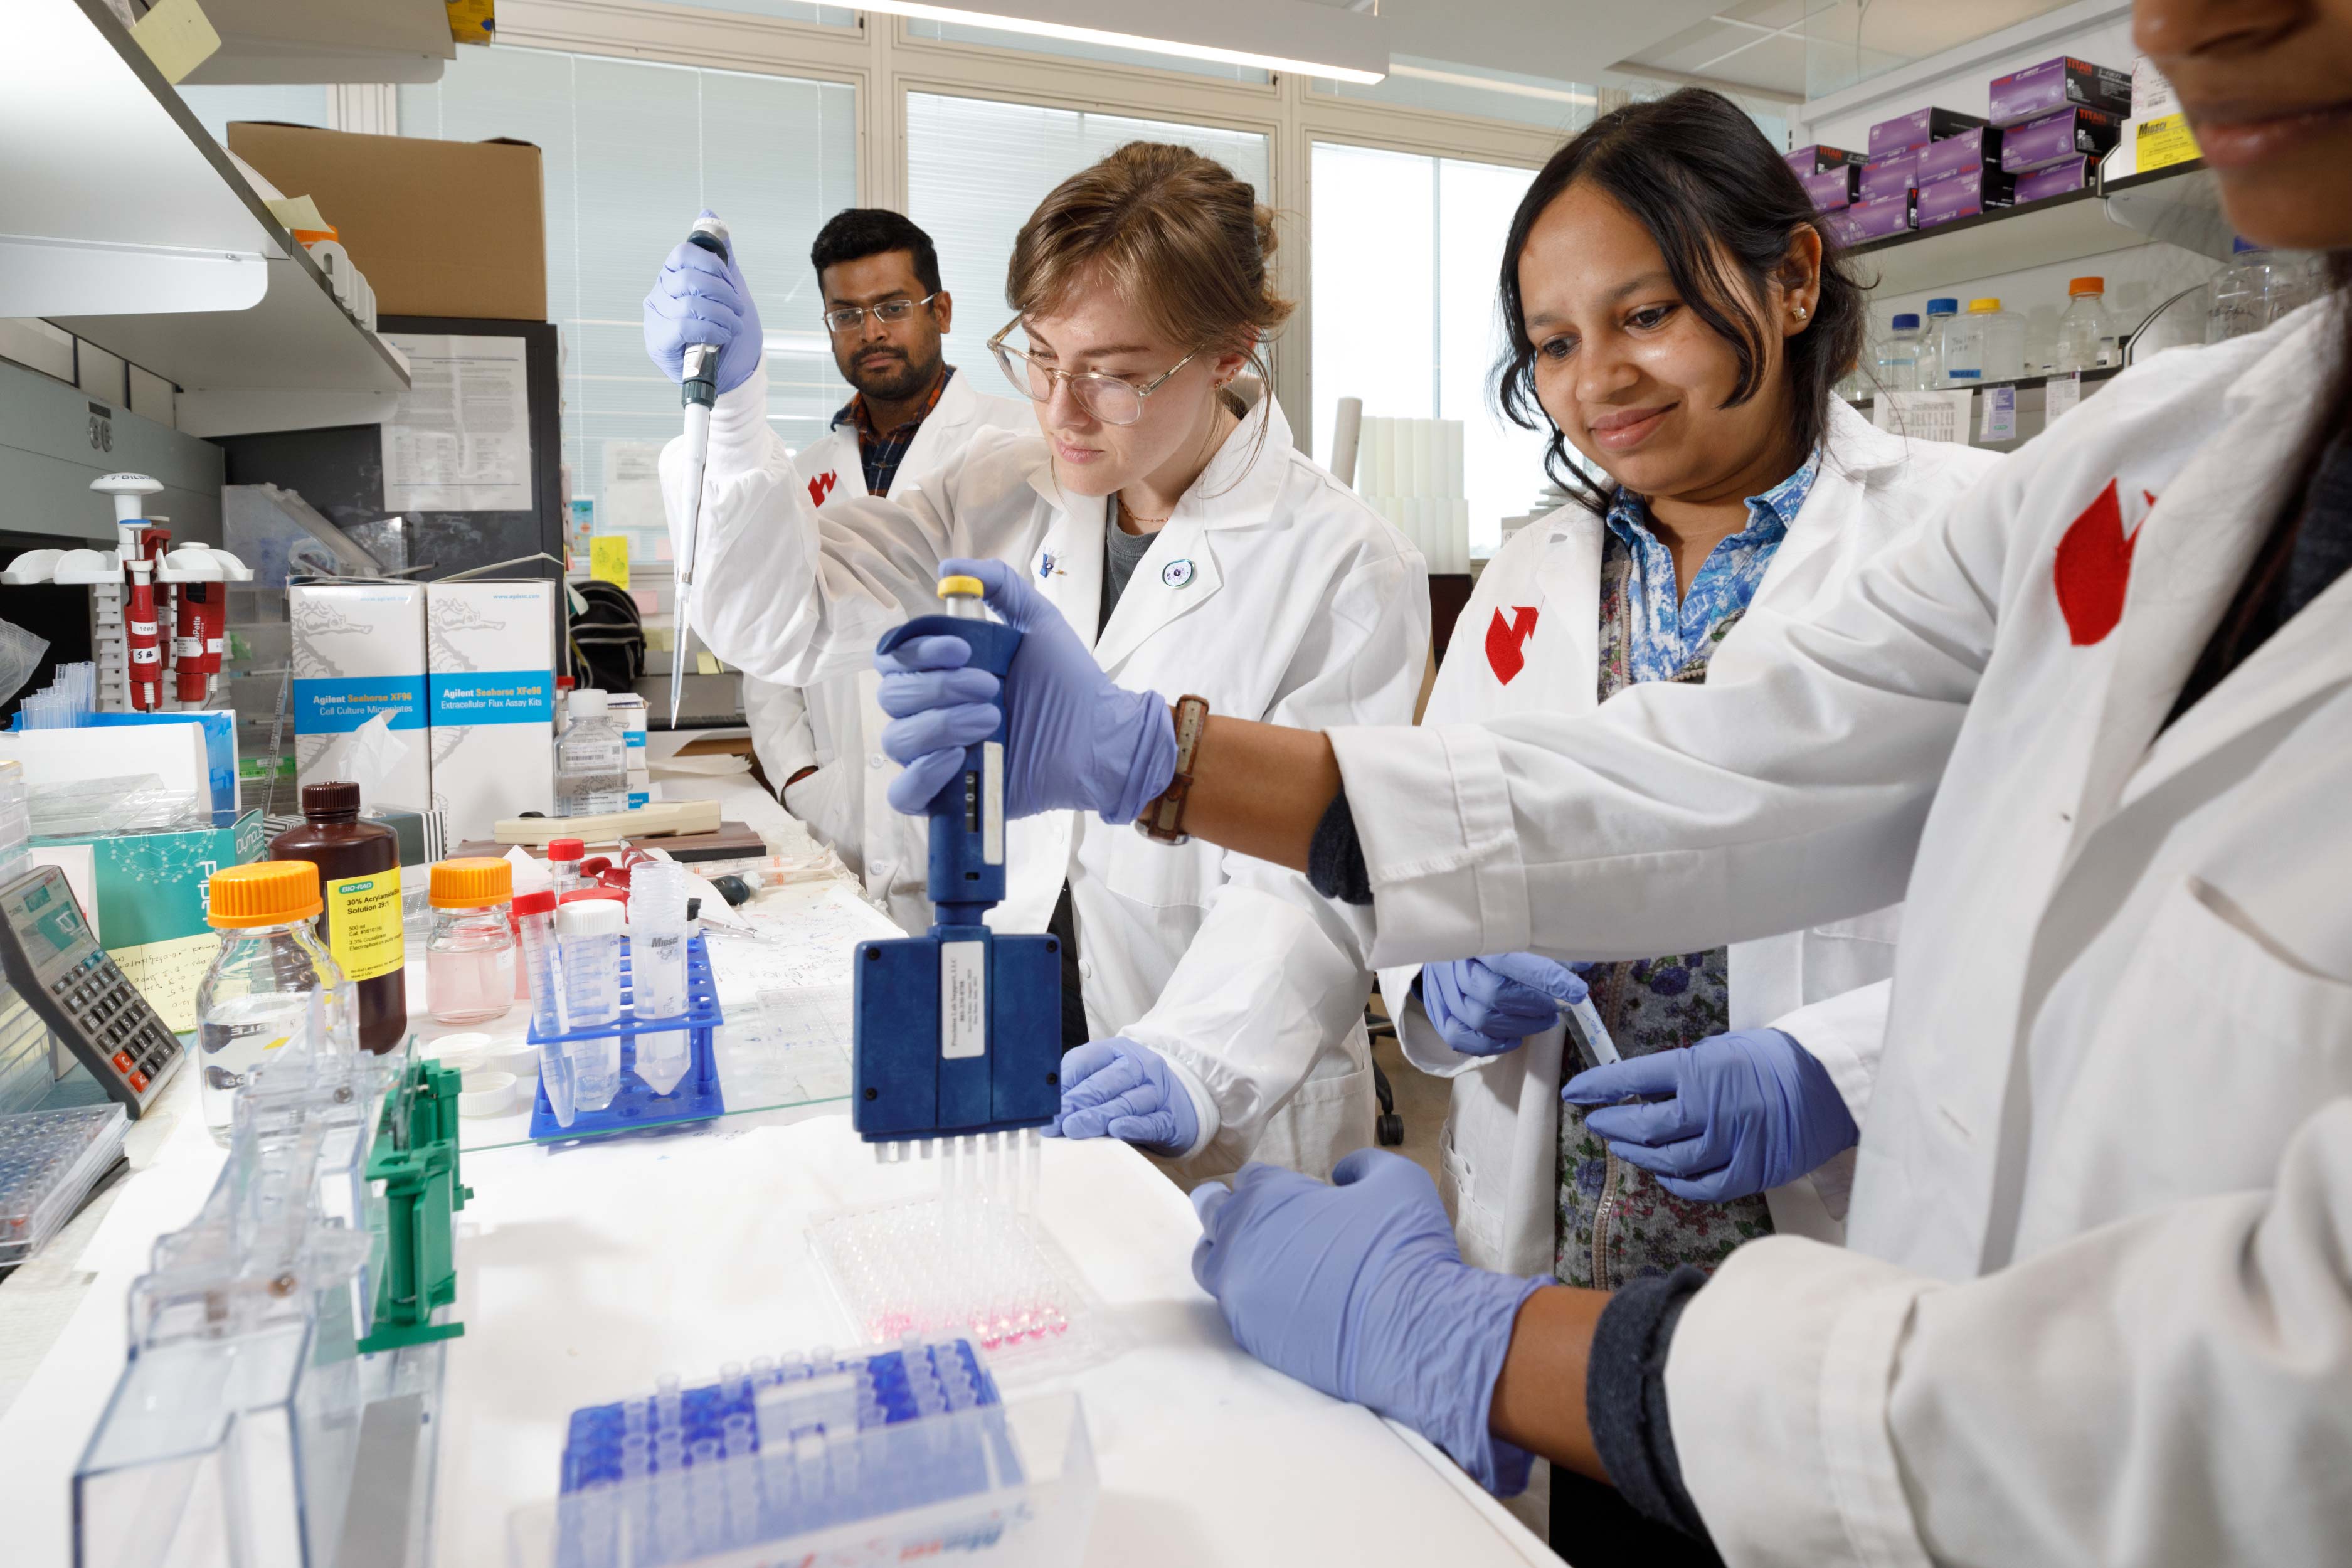 Four researchers in white lab coats work with research equipment in a lab